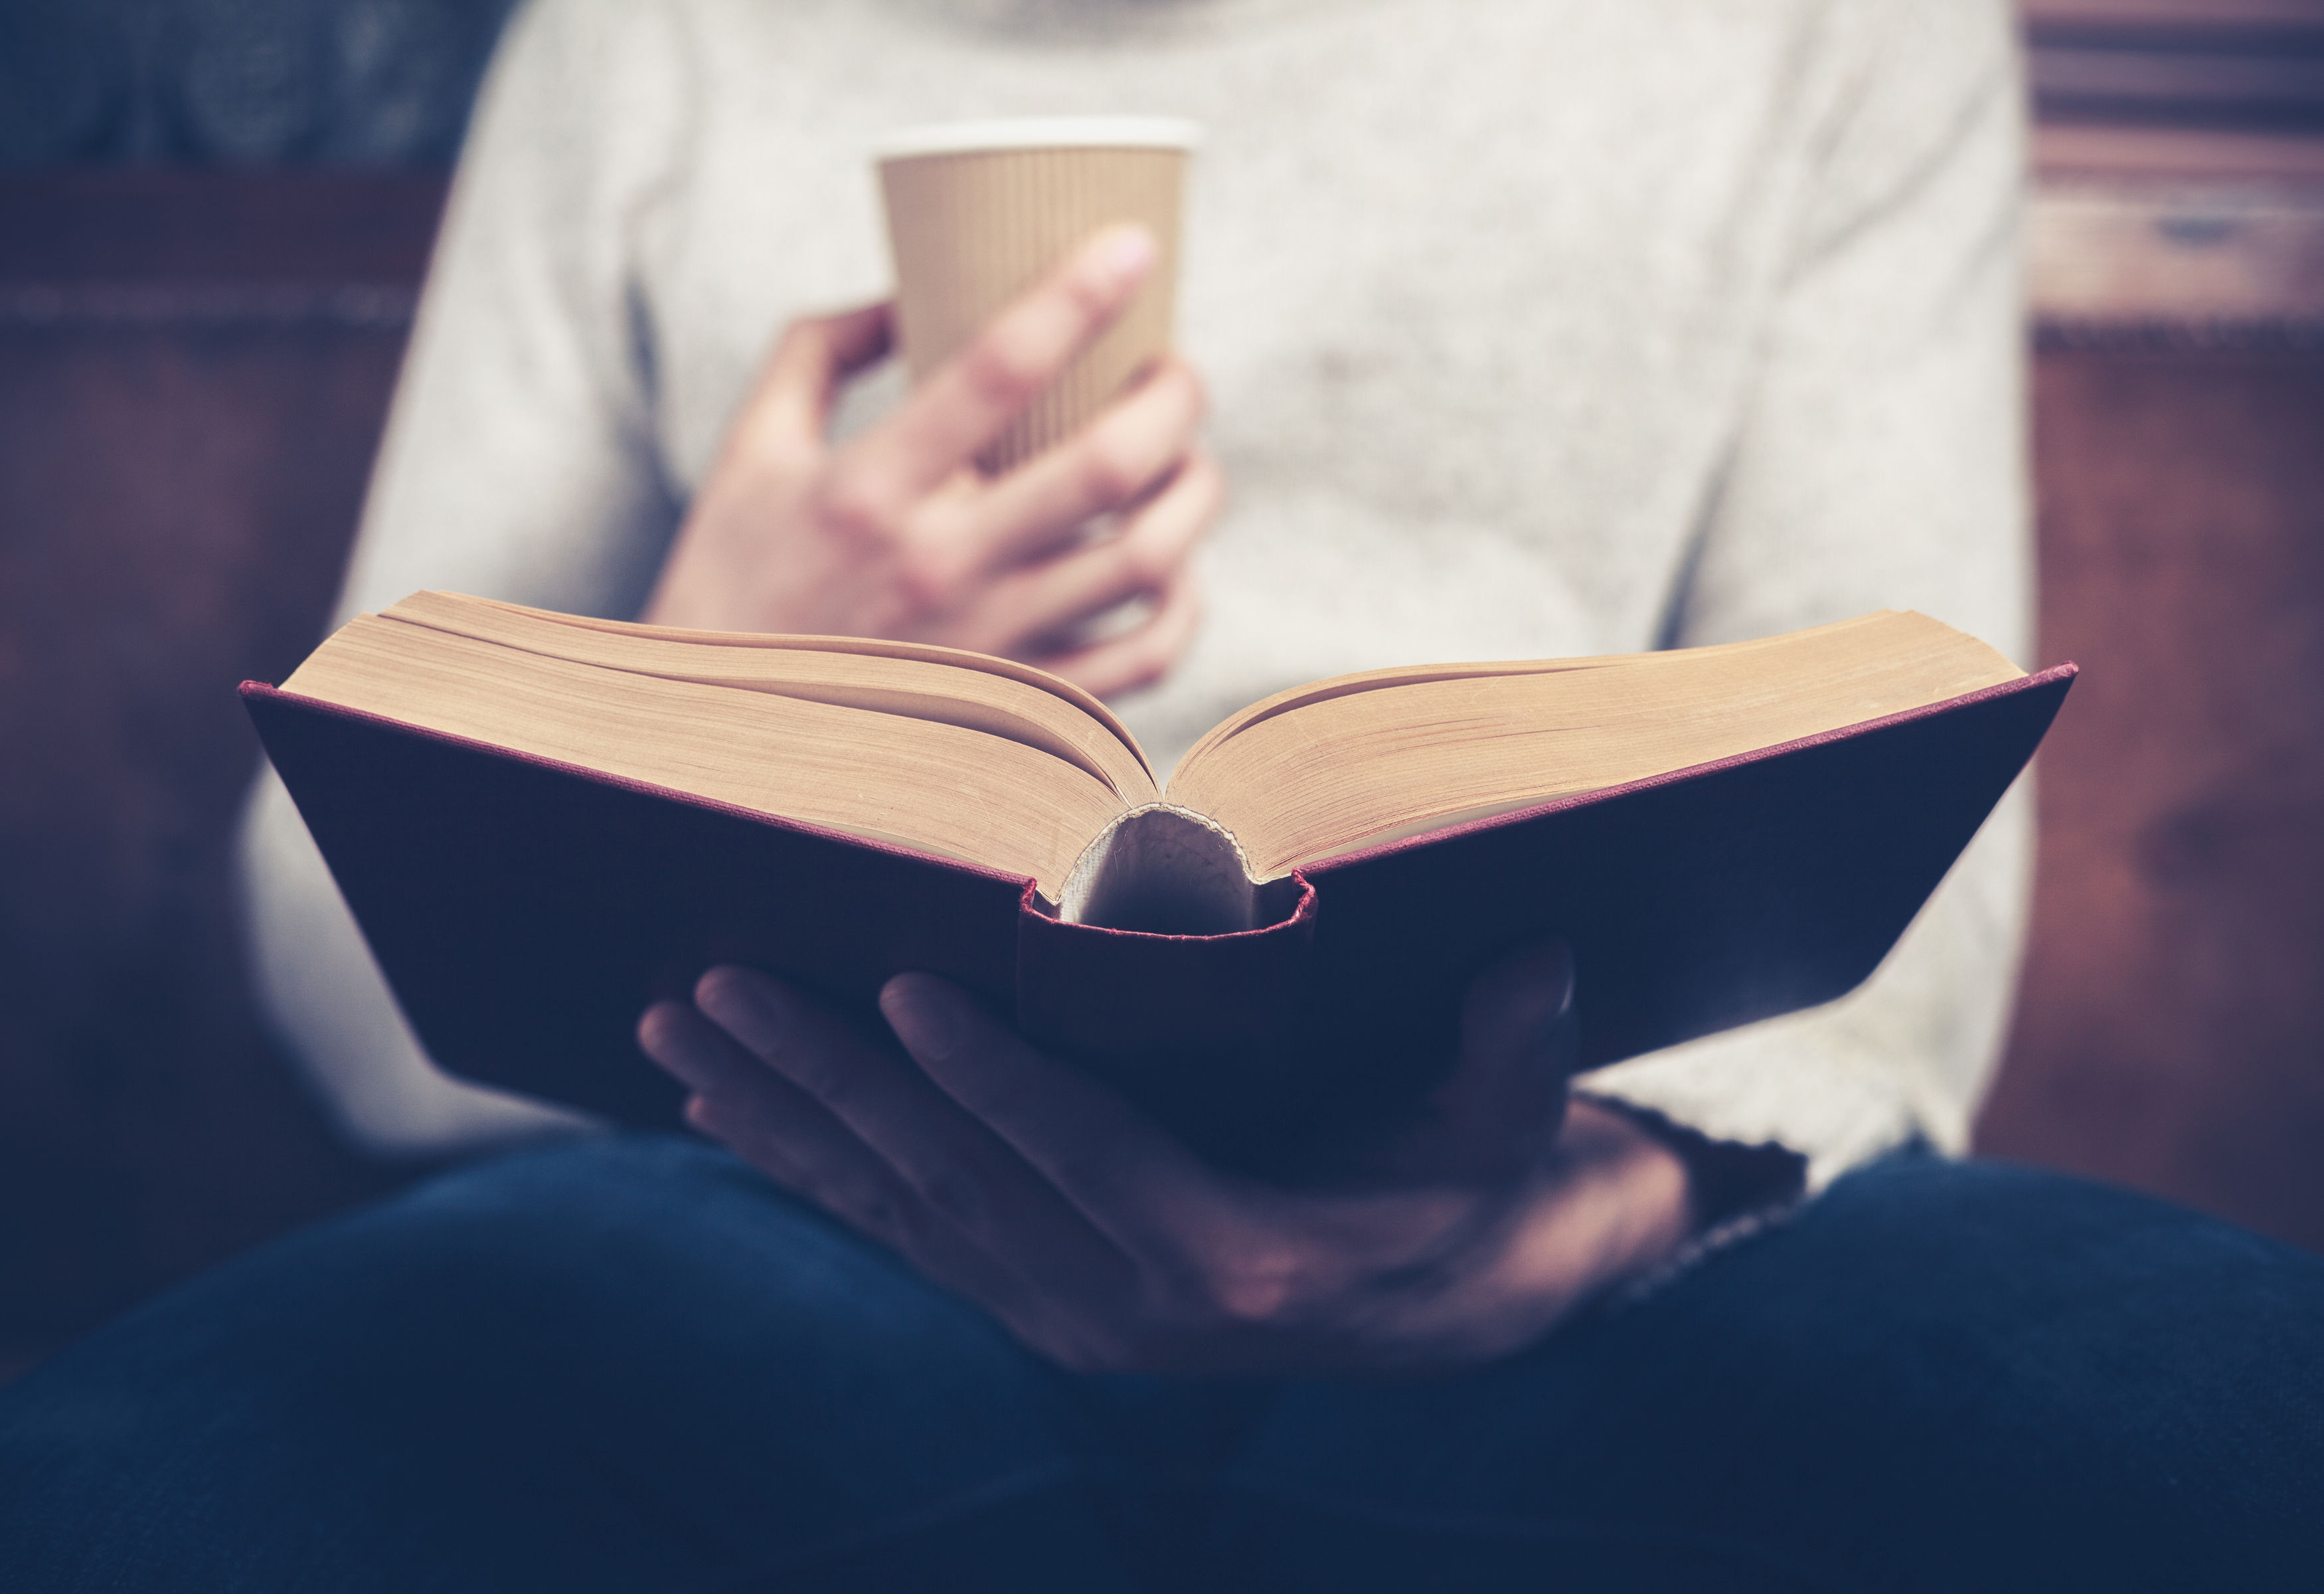 Image of a person holding a drink while reading